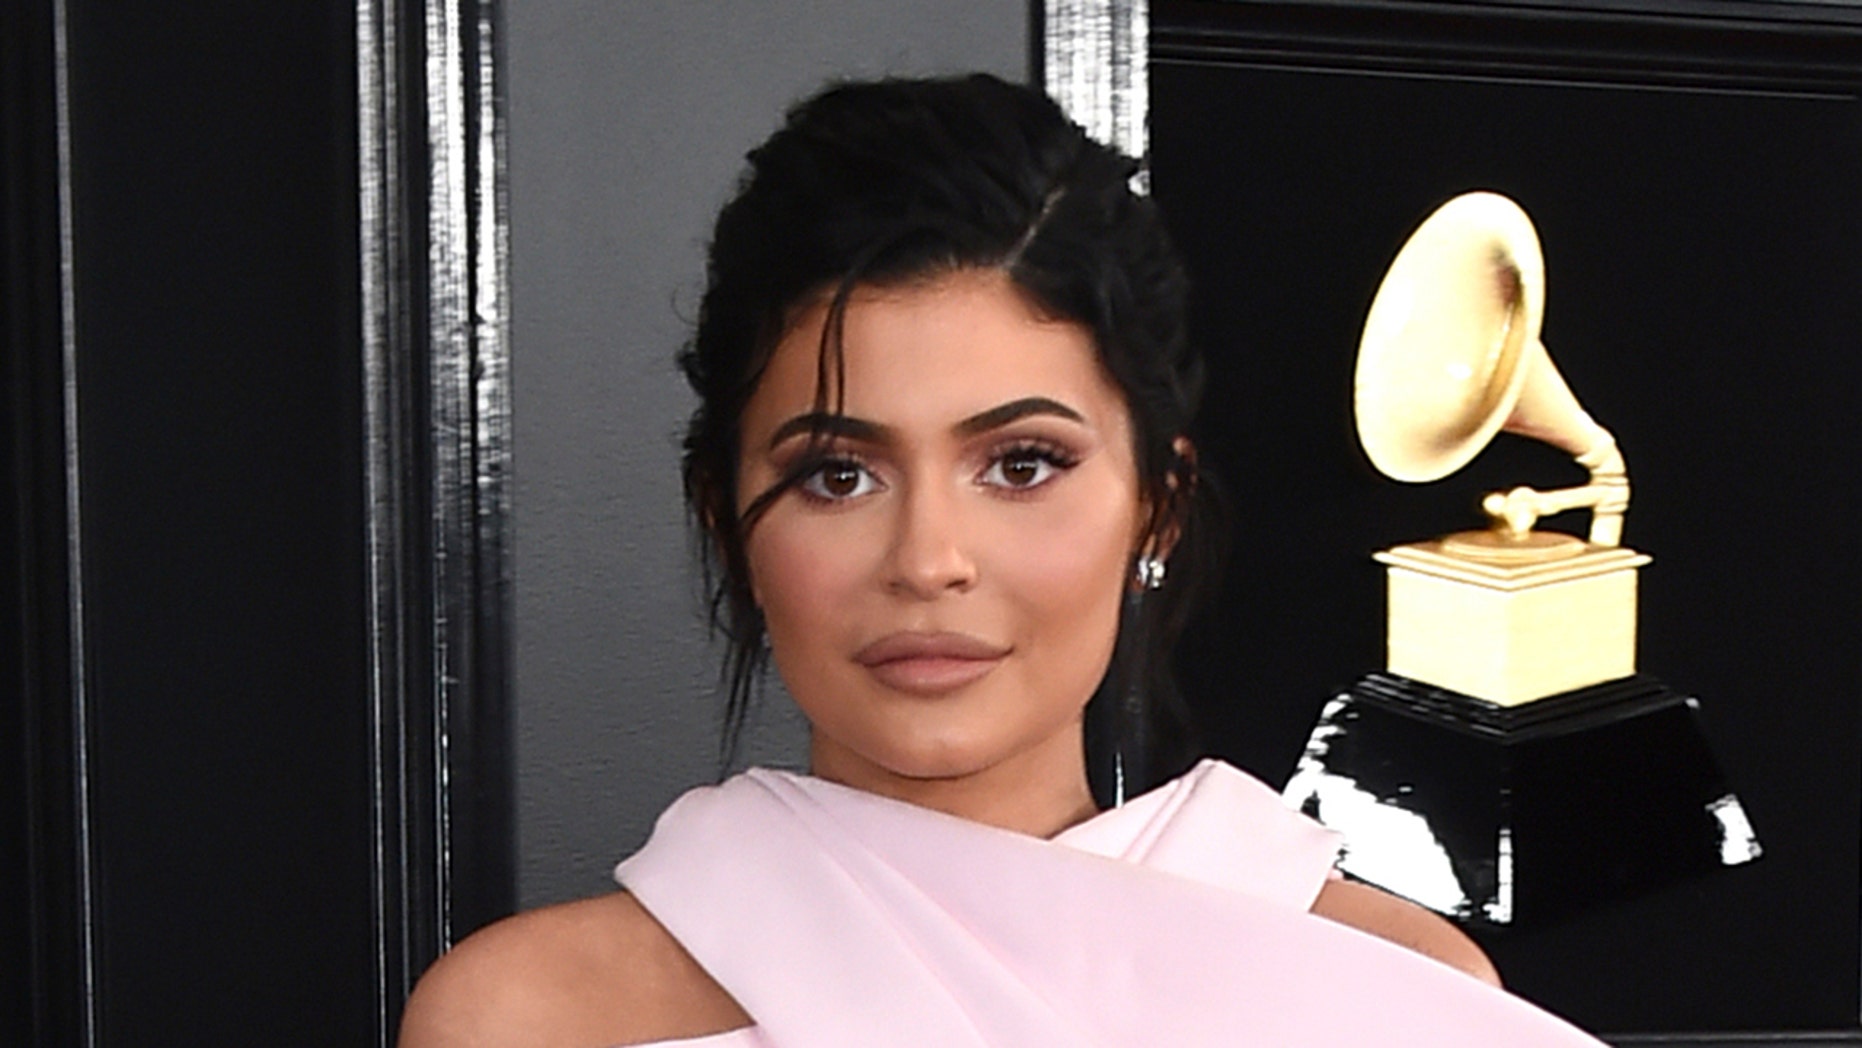 Kylie Jenner arrives at the 61st annual Grammy Awards at the Staples Center on Sunday, Feb. 10, 2019, in Los Angeles.